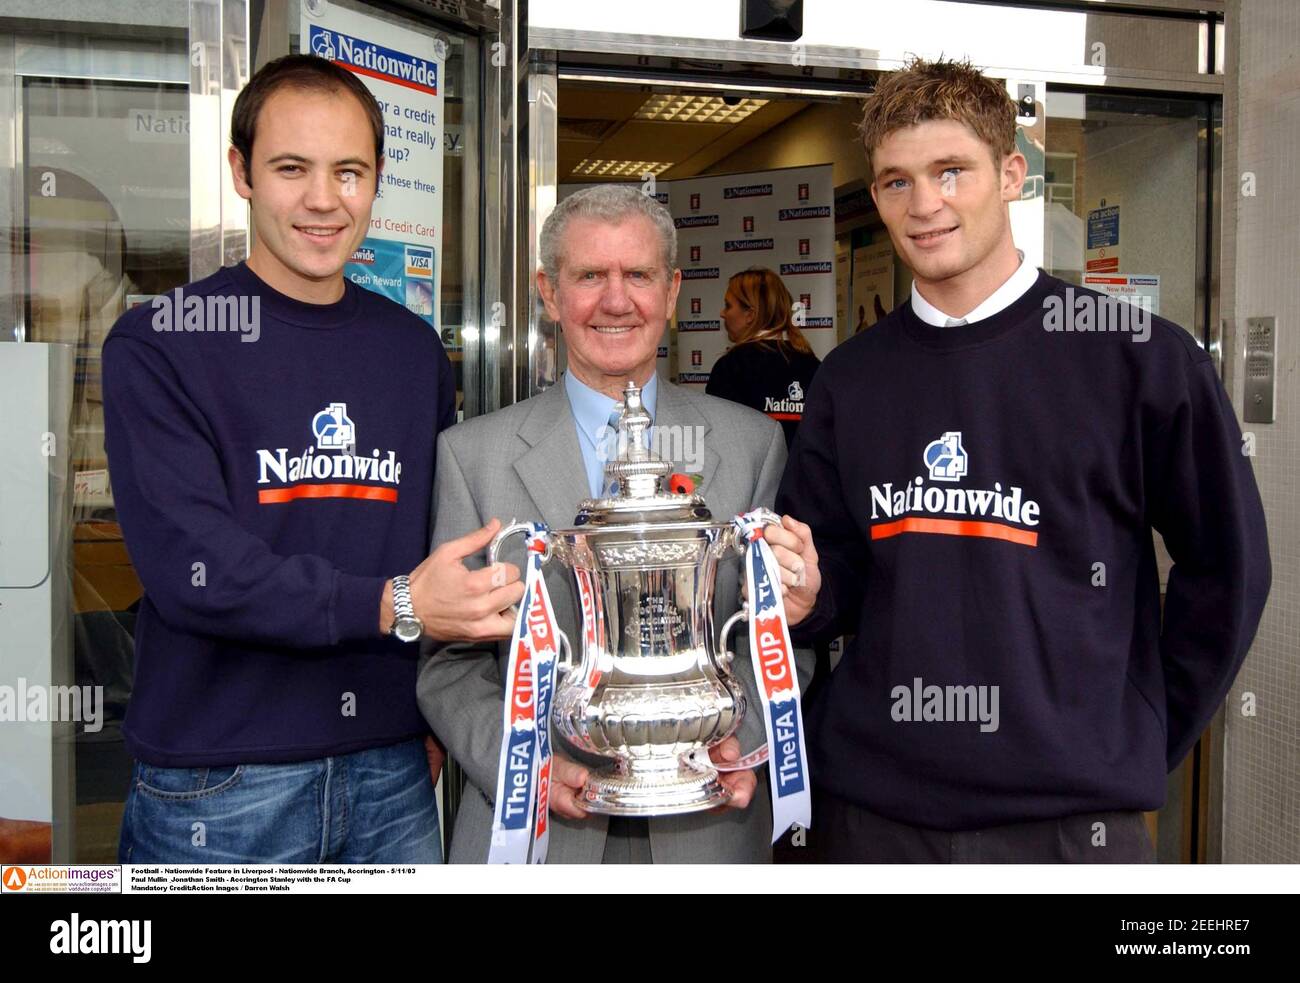 Football - Nationwide Feature in Liverpool - Nationwide Branch, Accrington  - 5/11/03 Paul Mullin & Jonathan Smith - Accrington Stanley with the FA Cup  Mandatory Credit:Action Inages / Darren Walsh Stock Photo - Alamy